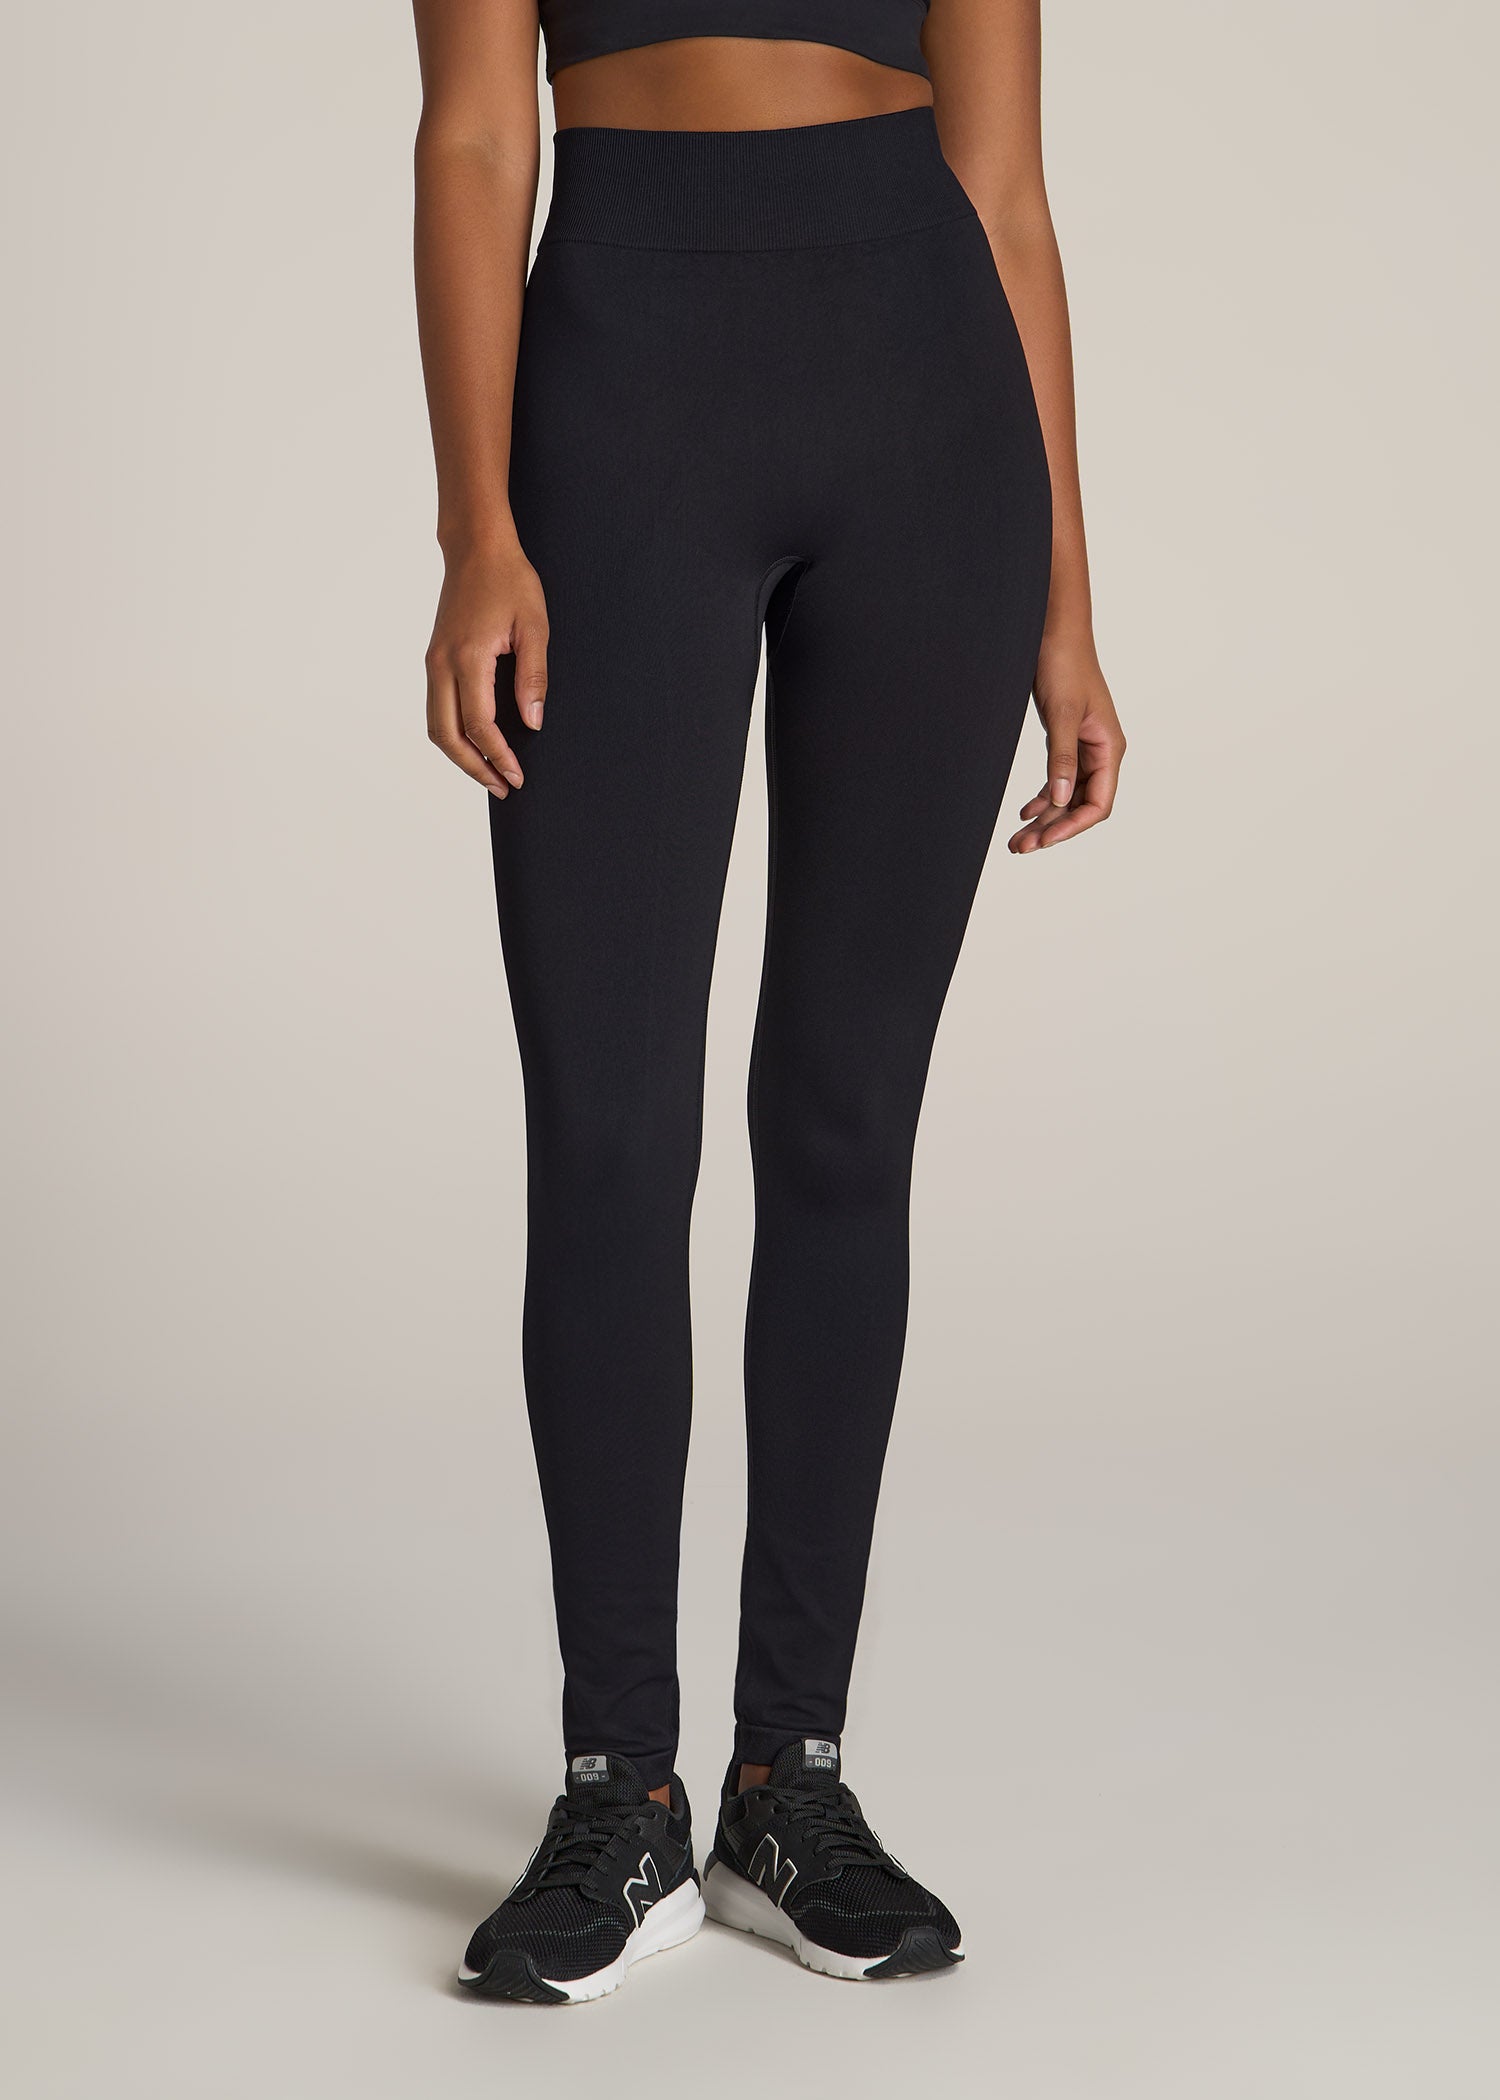 Seamless Leggings for Tall Women in Black XL / Tall / Solid Black